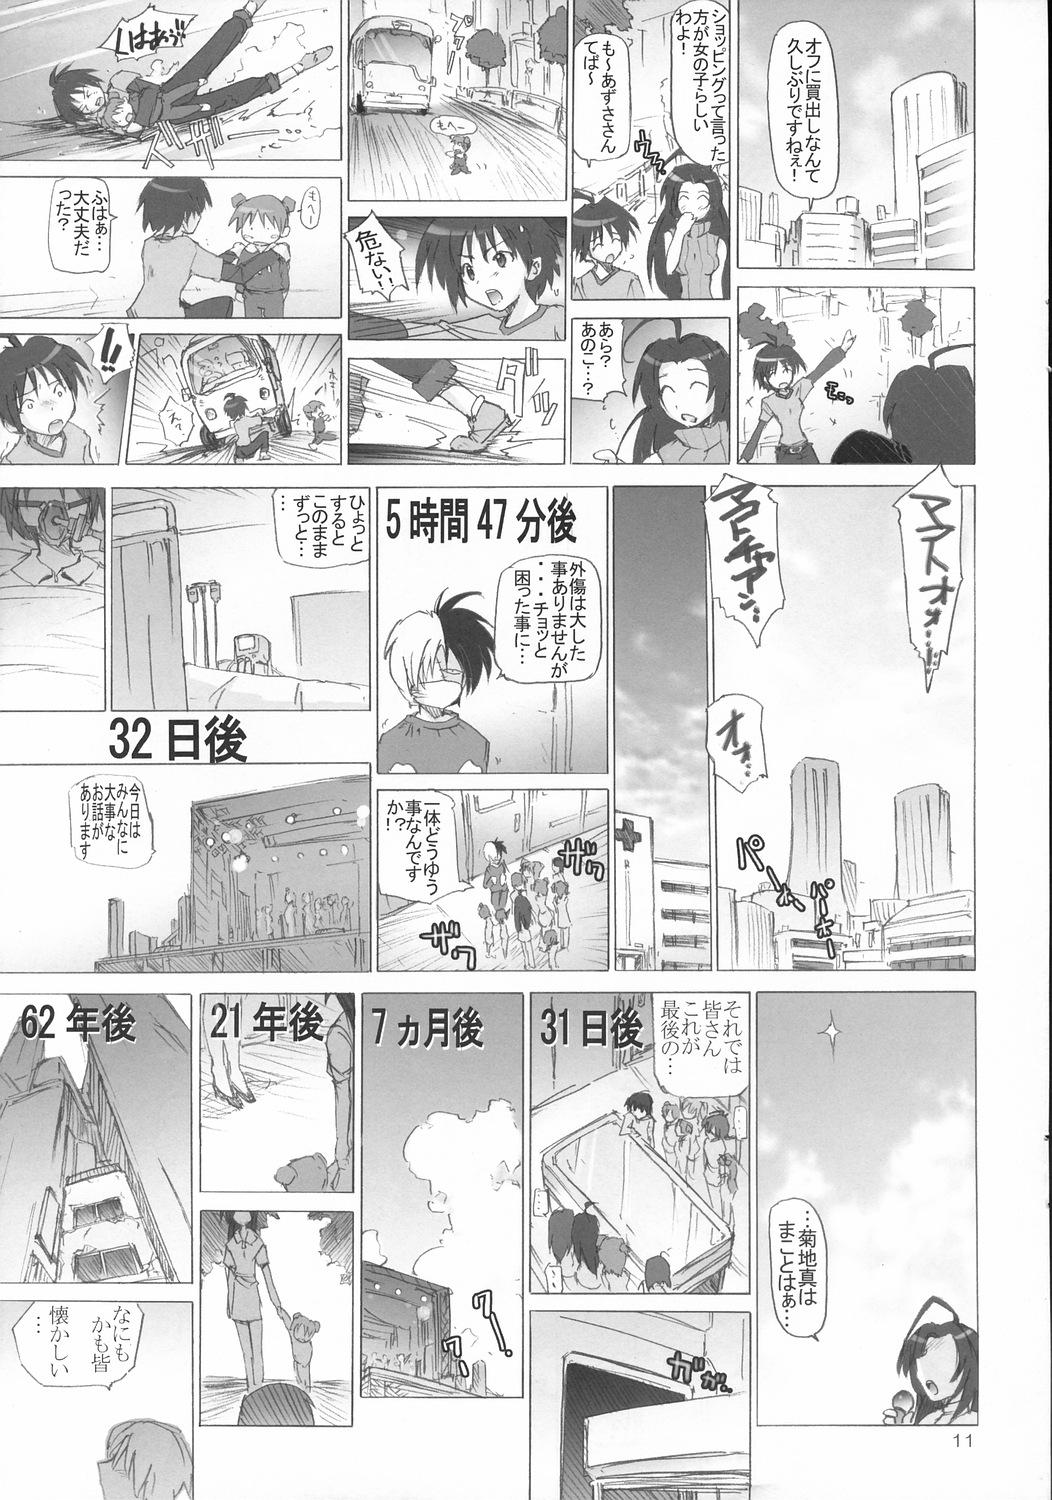 Swallowing M@KOTO STYLE - The idolmaster Gilf - Page 10